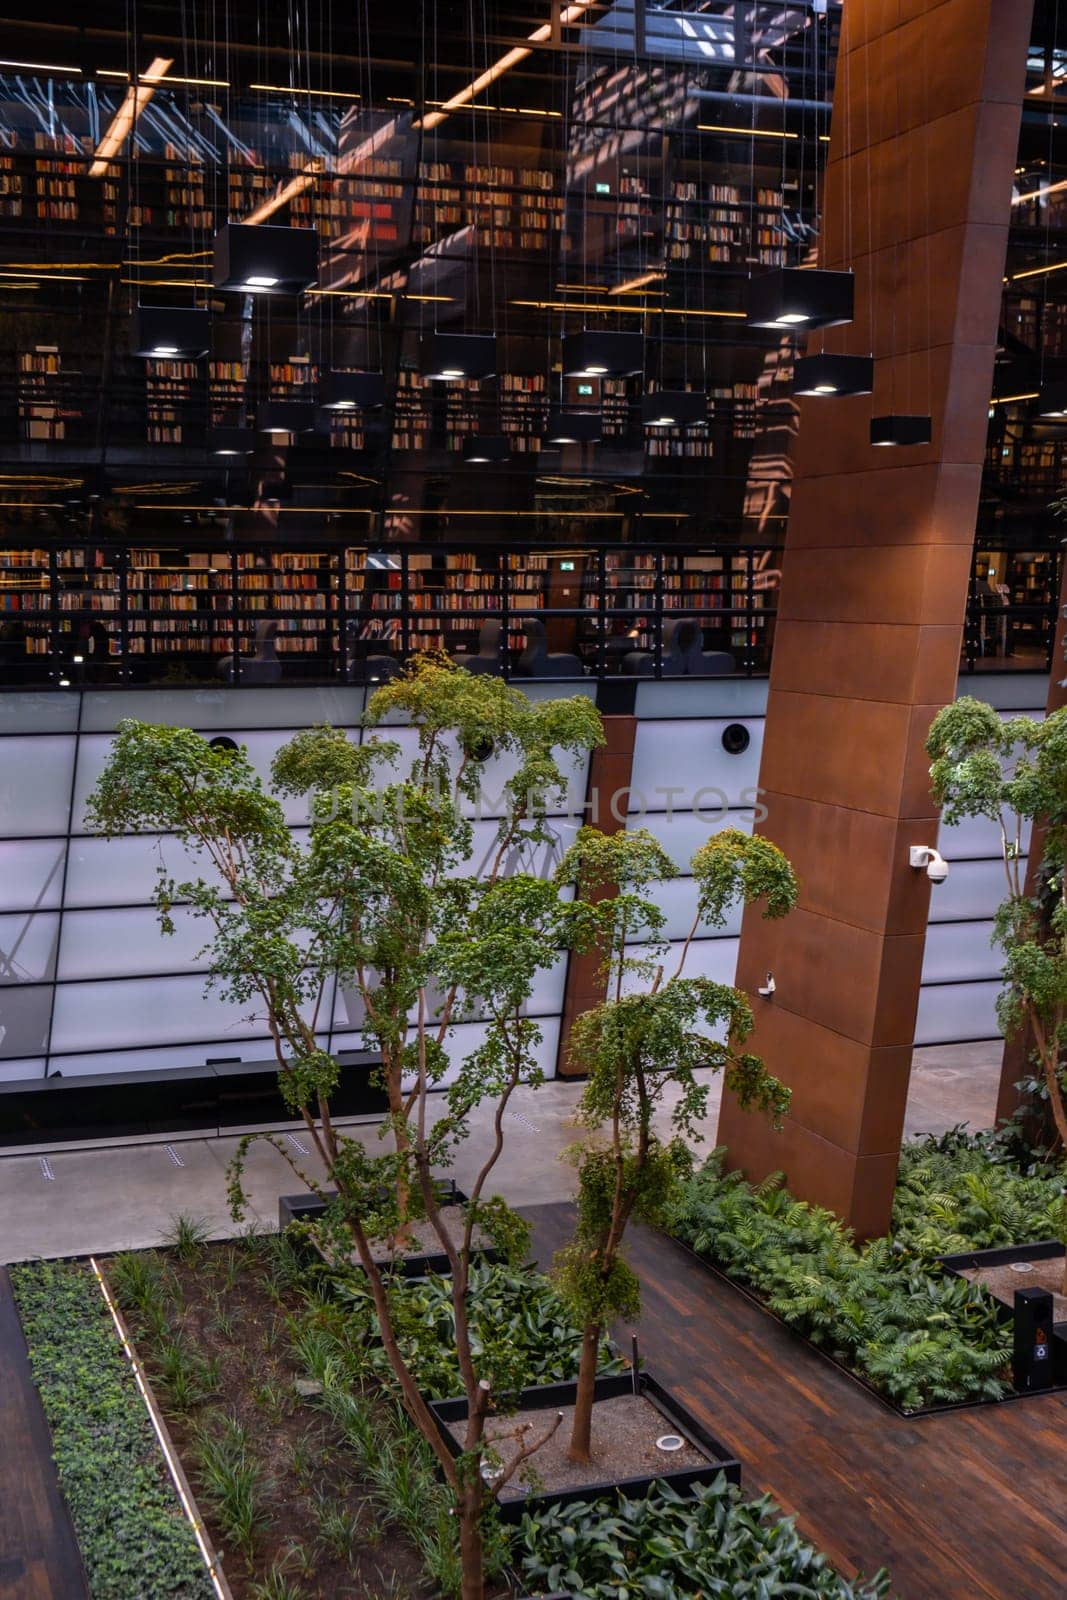 Public Library architecture bookcase Indoor trees Modern interior design of library in European Solidarity Centre Gdansk Poland. Biophilia design connecting with nature green areas. Modern abstract museum in Europe. Travel destination tourist attraction